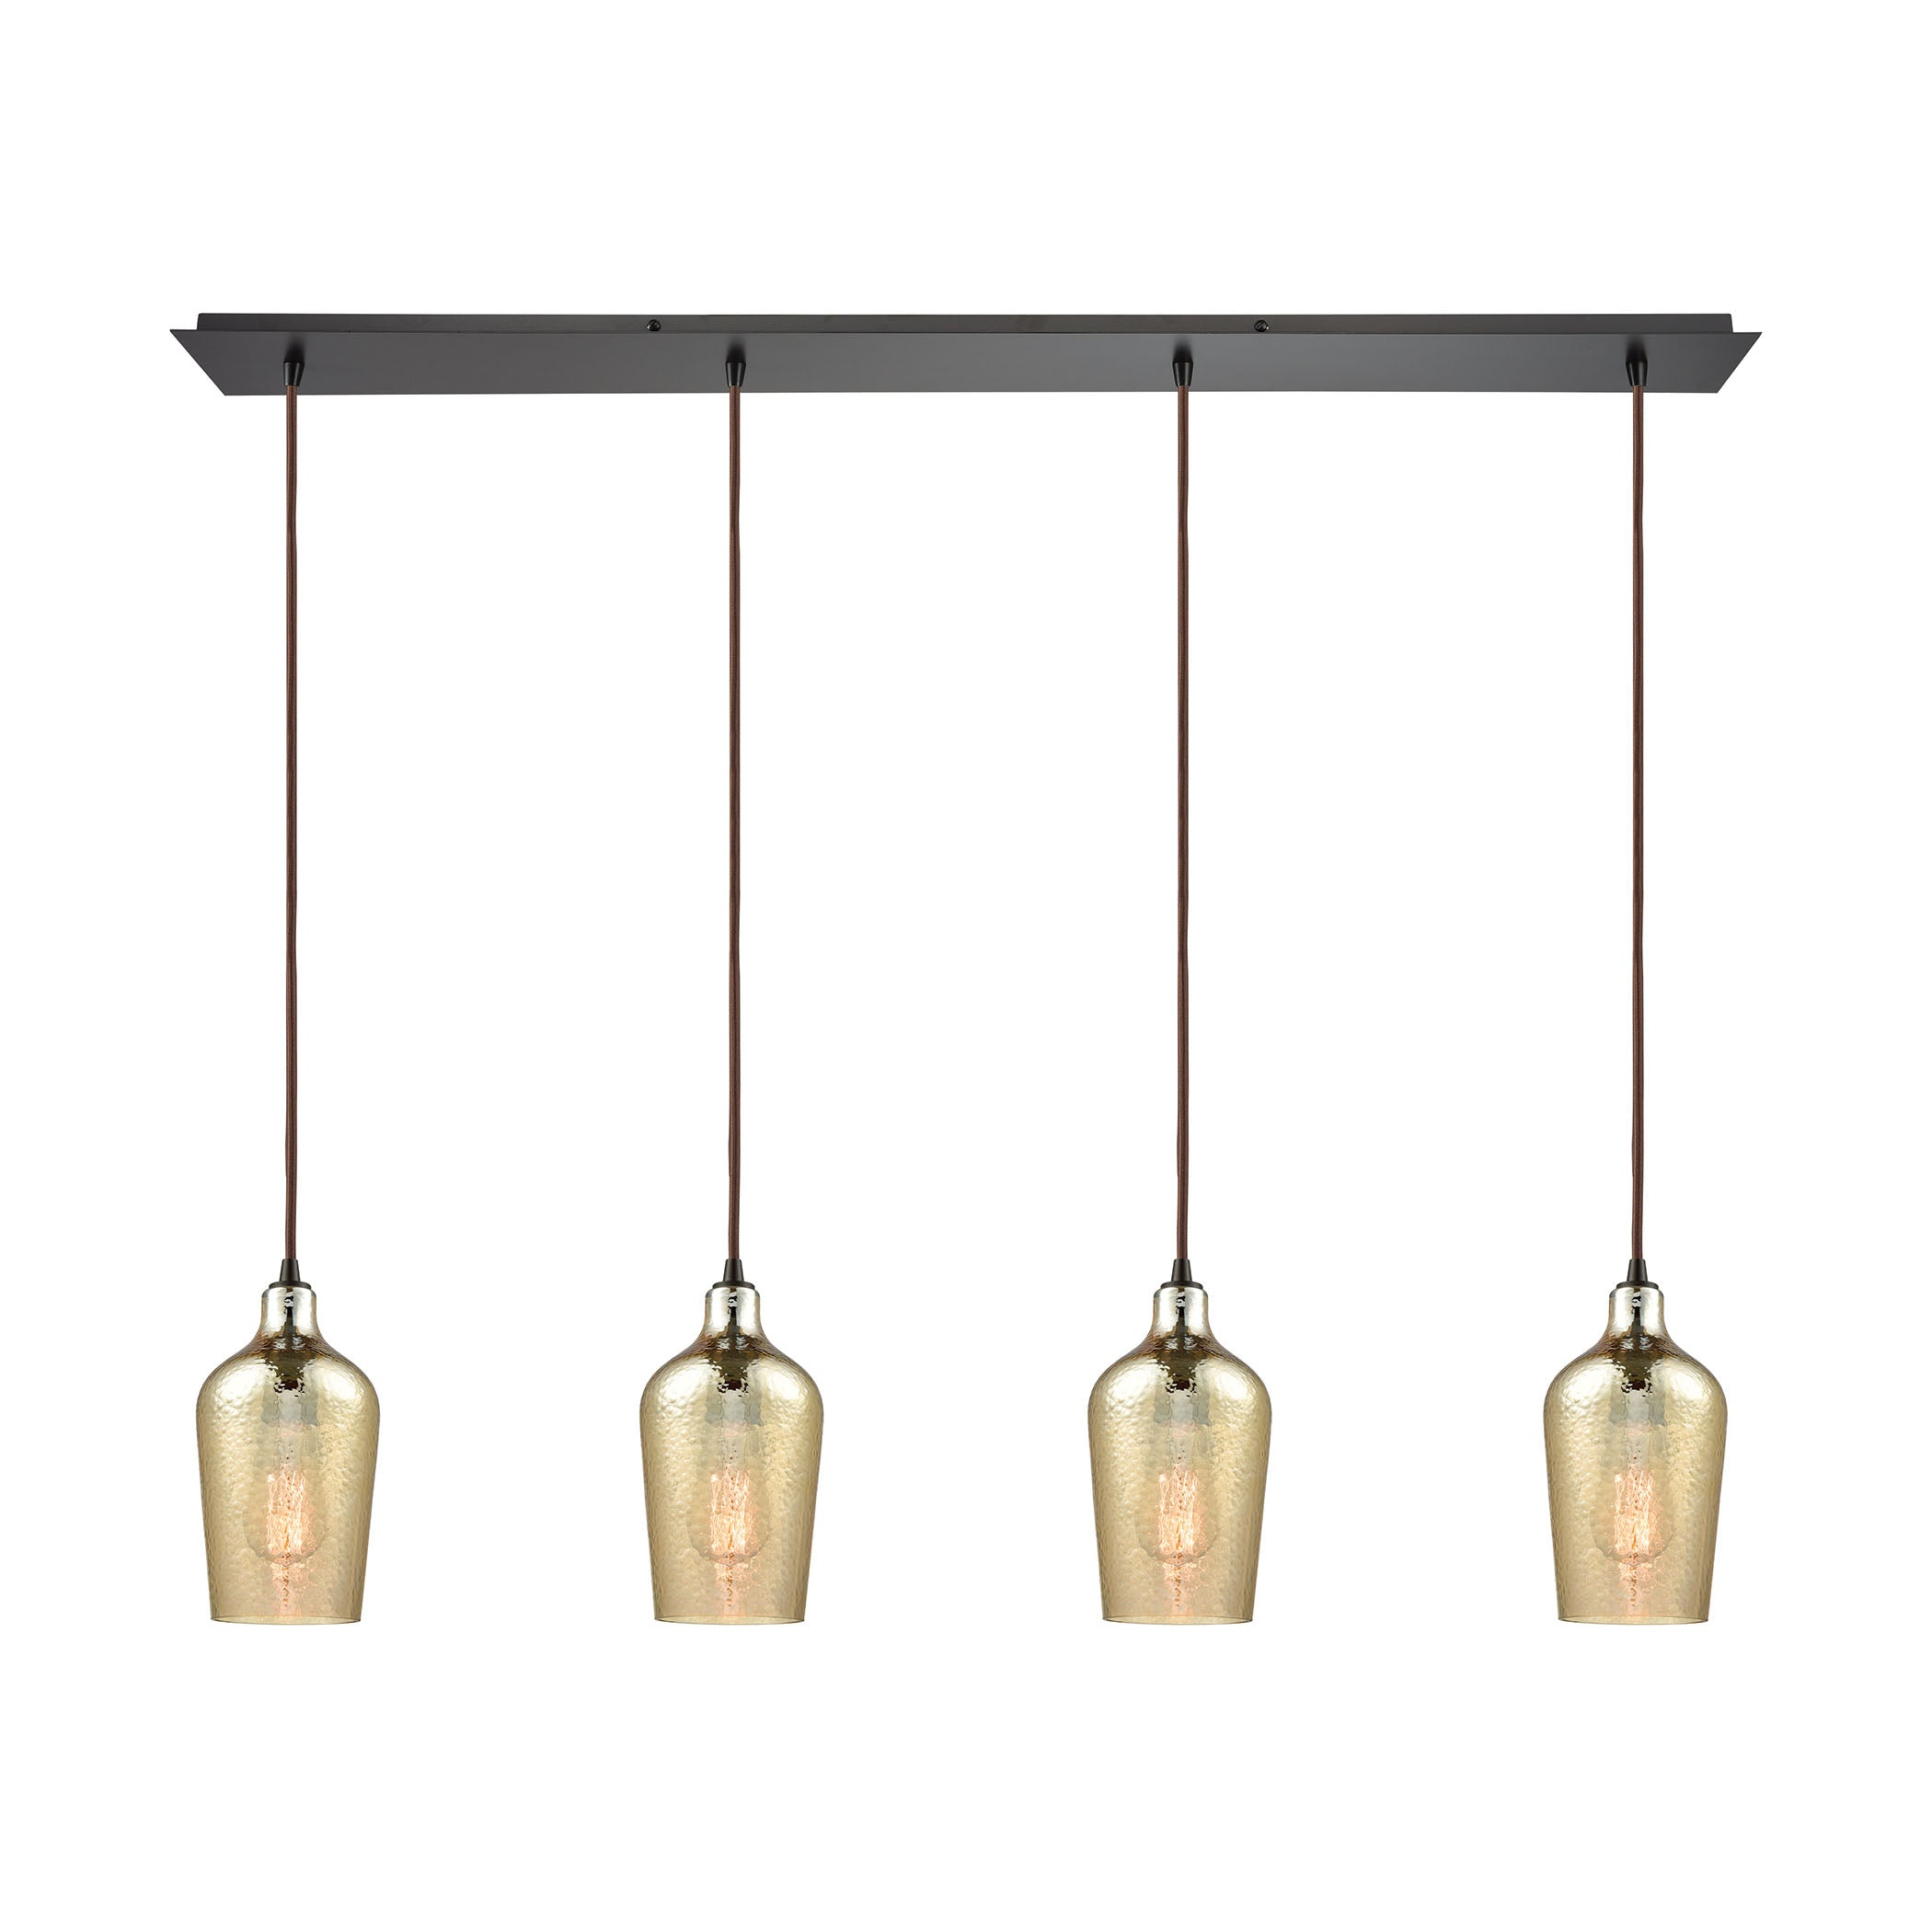 ELK Lighting 10840/4LP Hammered Glass 4-Light Linear Pendant Fixture in Oiled Bronze with Amber-plated Hammered Glass